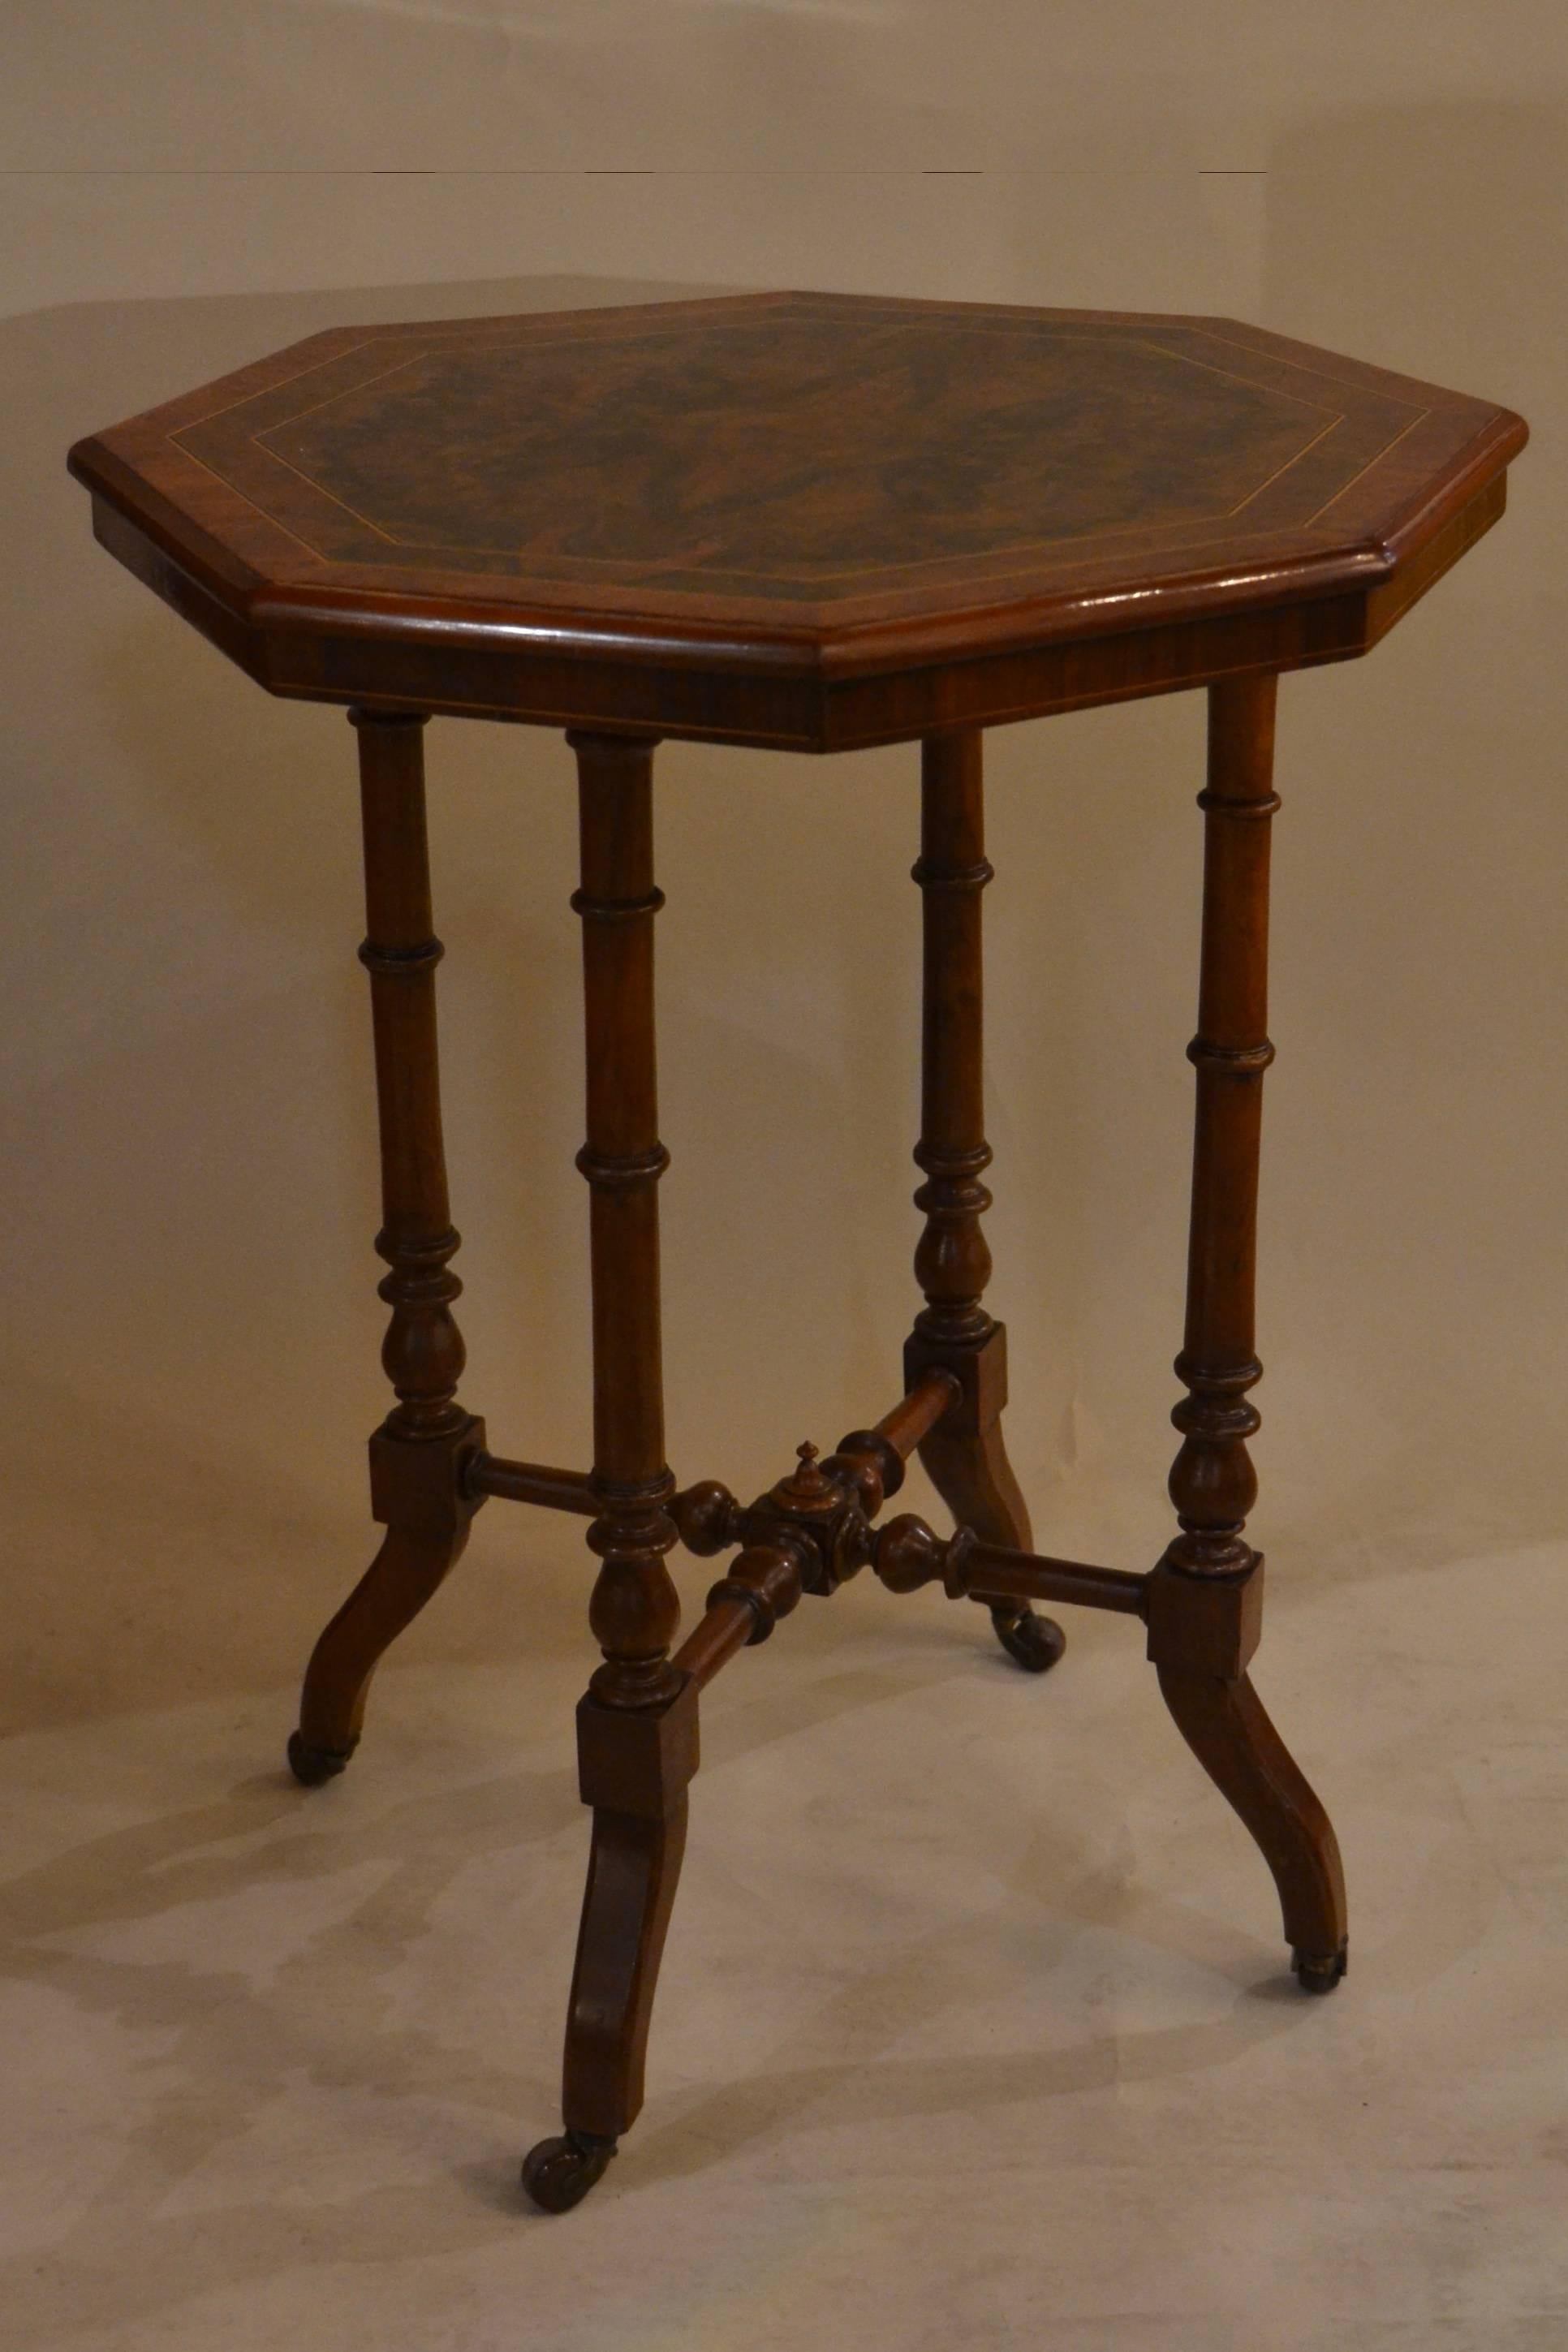 A nicely made occasional table with two bands of inlay following the octagonal form of the piece. The bulr is of fine color and grain.